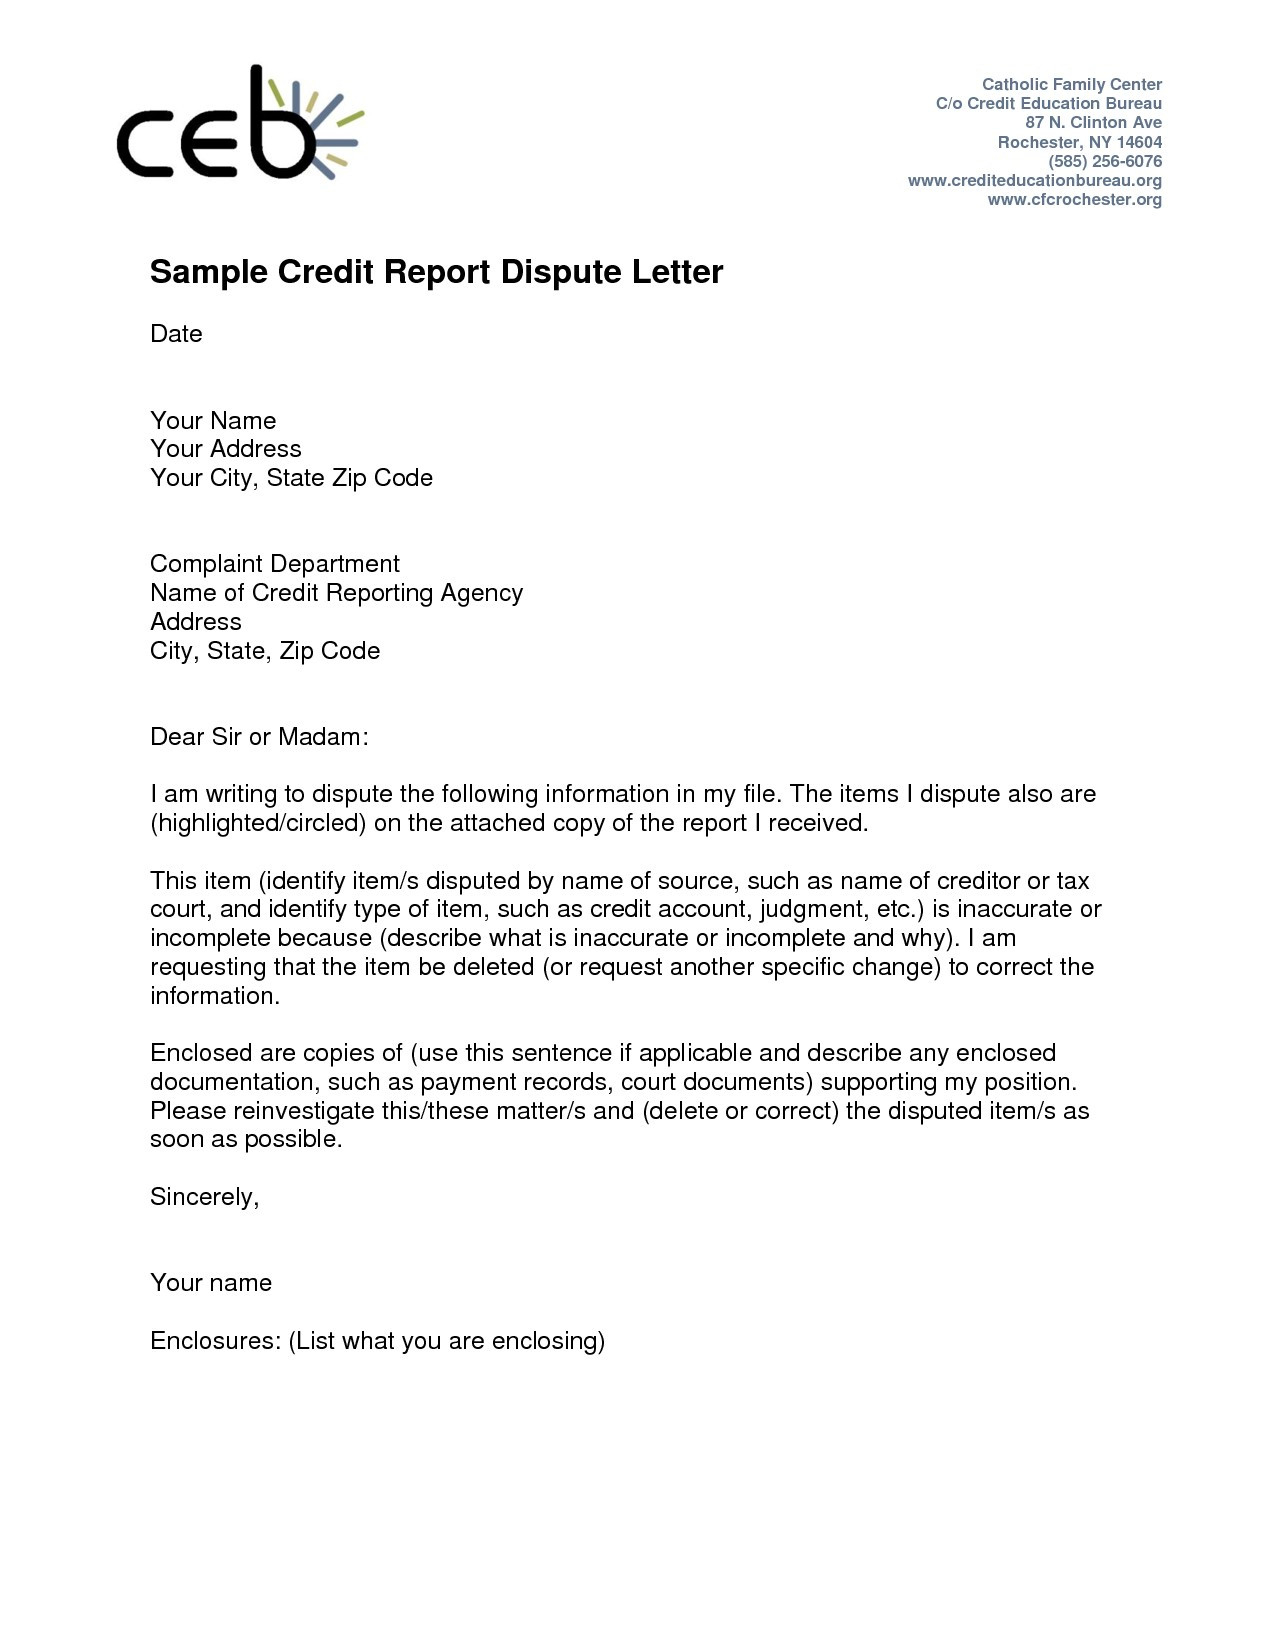 Goodwill Letter Template to Remove Paid Collections - the Best Way to Dispute Credit Report Inspirational Fresh Late